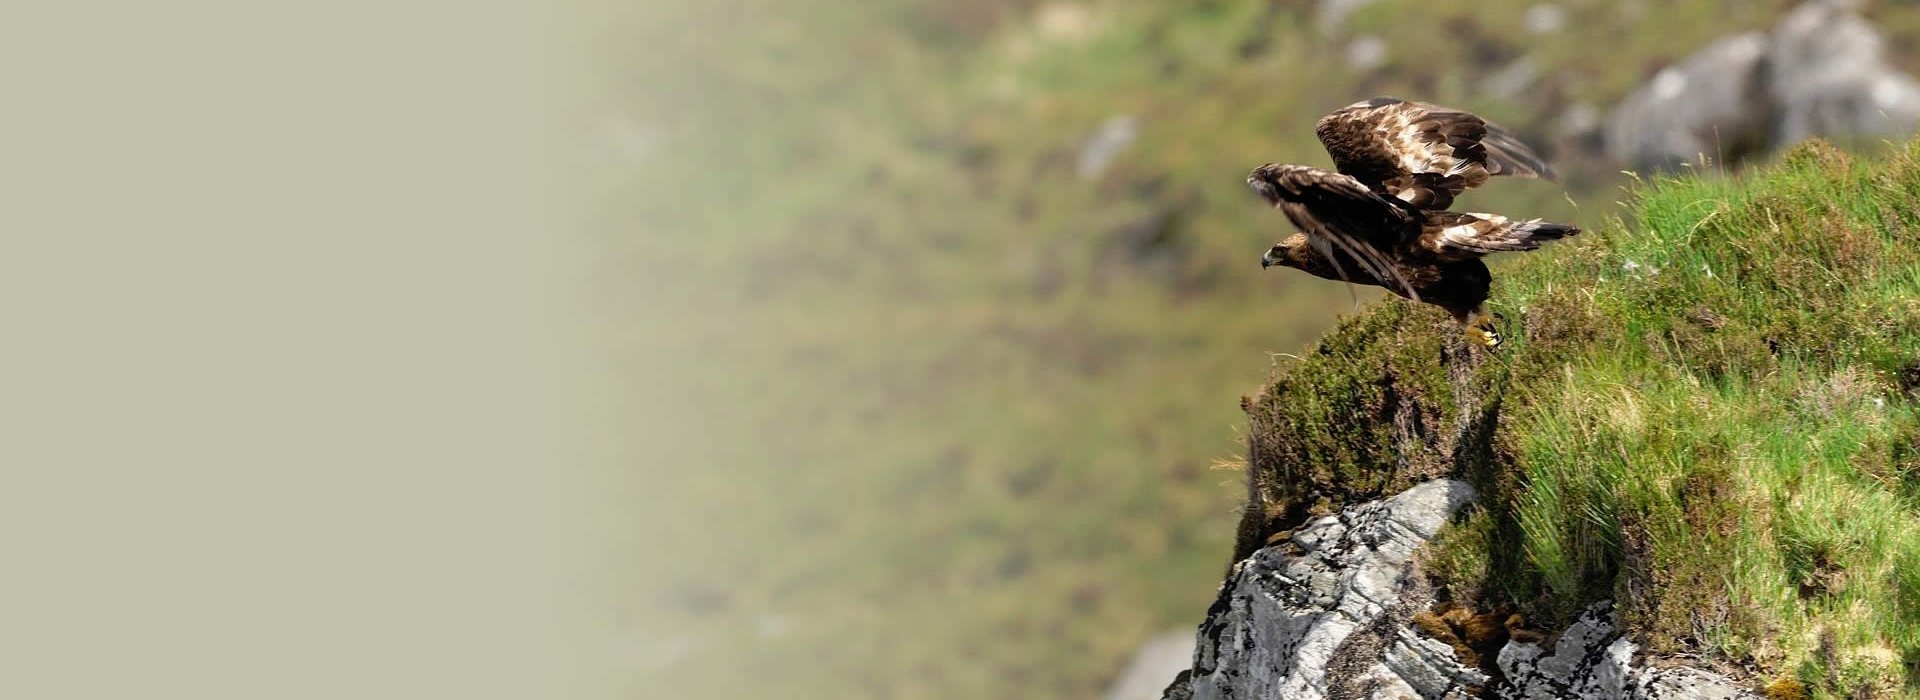 An eagle taking off from a cliff edge